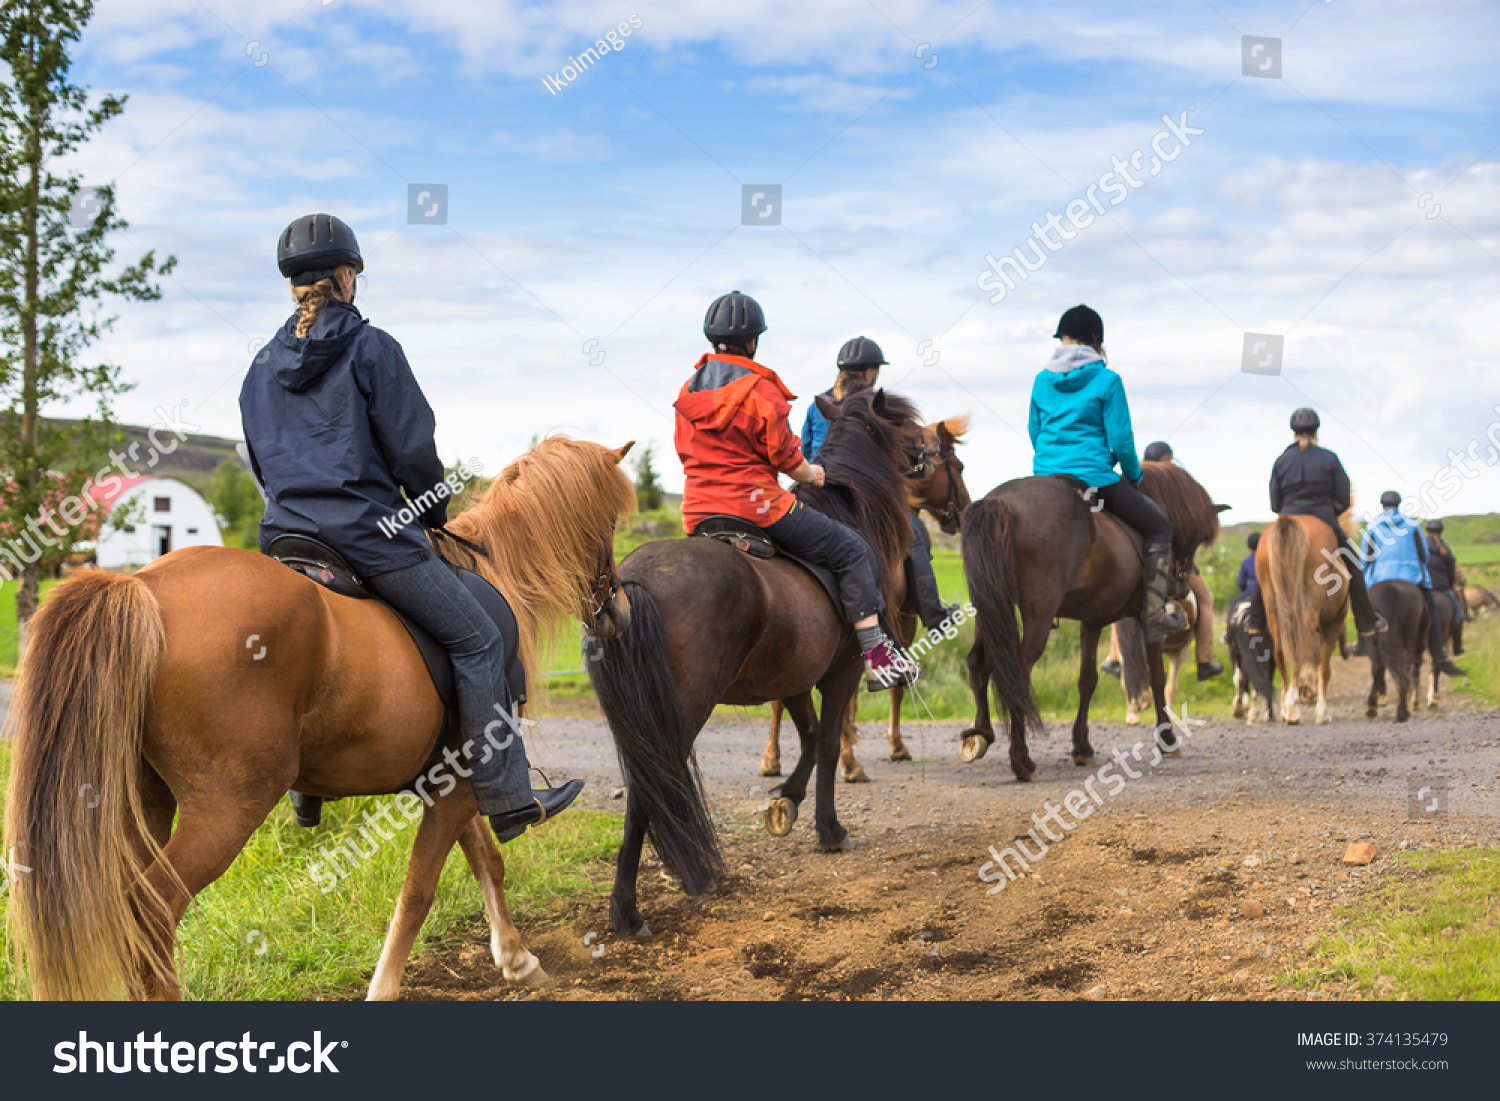 Group of horseback riders ride  in Iceland #374135479